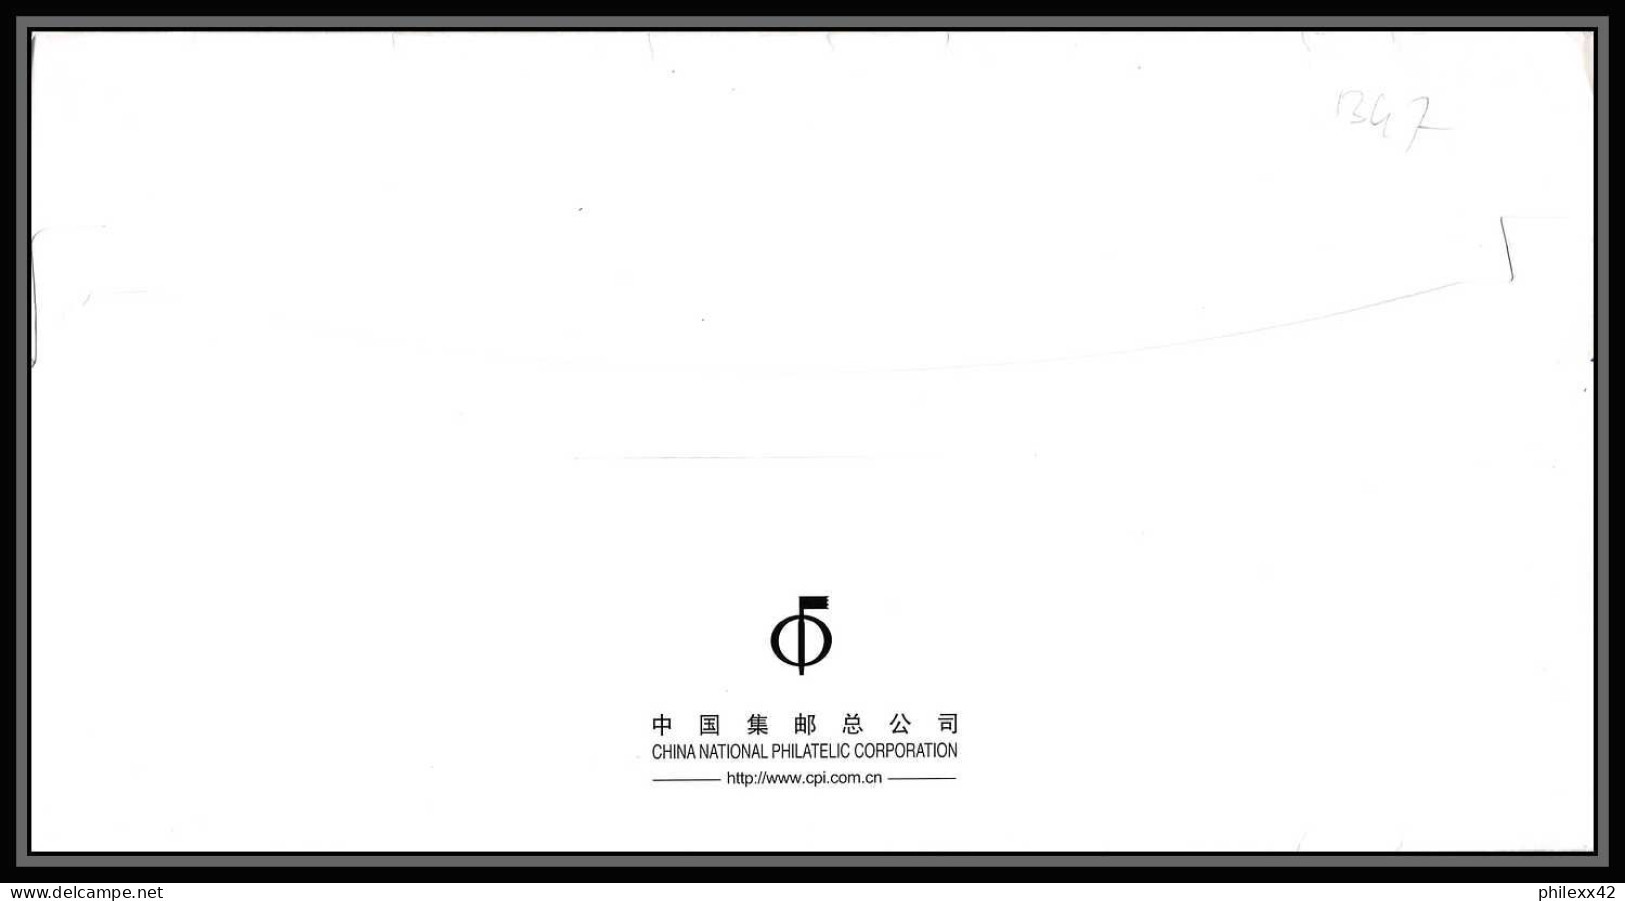 1347 Espace (space Raumfahrt) Lettre (cover) CHINE (china) 12/10/2005 Commemoration For Chinese Astronauts Space Flights - Asien